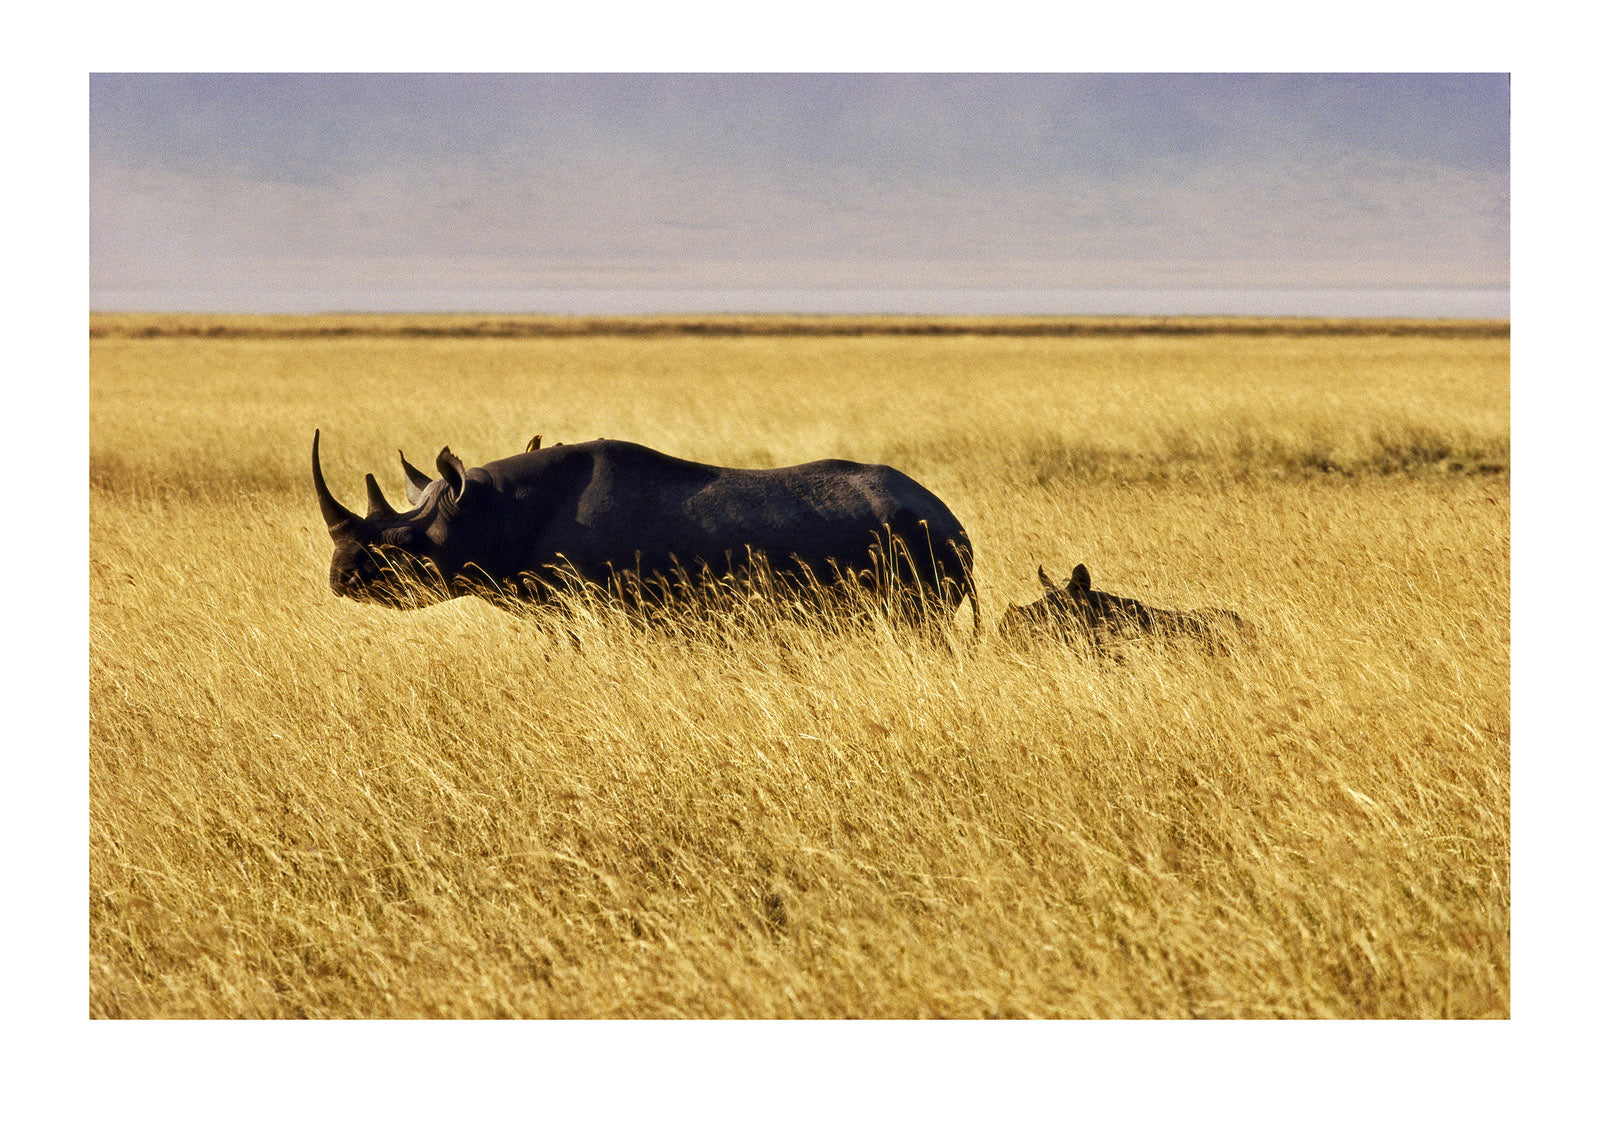 A black rhinoceros and her calf in tall grass. Ngorongoro Crater, Ngorongoro Conservation Area, Great Rift Valley, Tanzania.